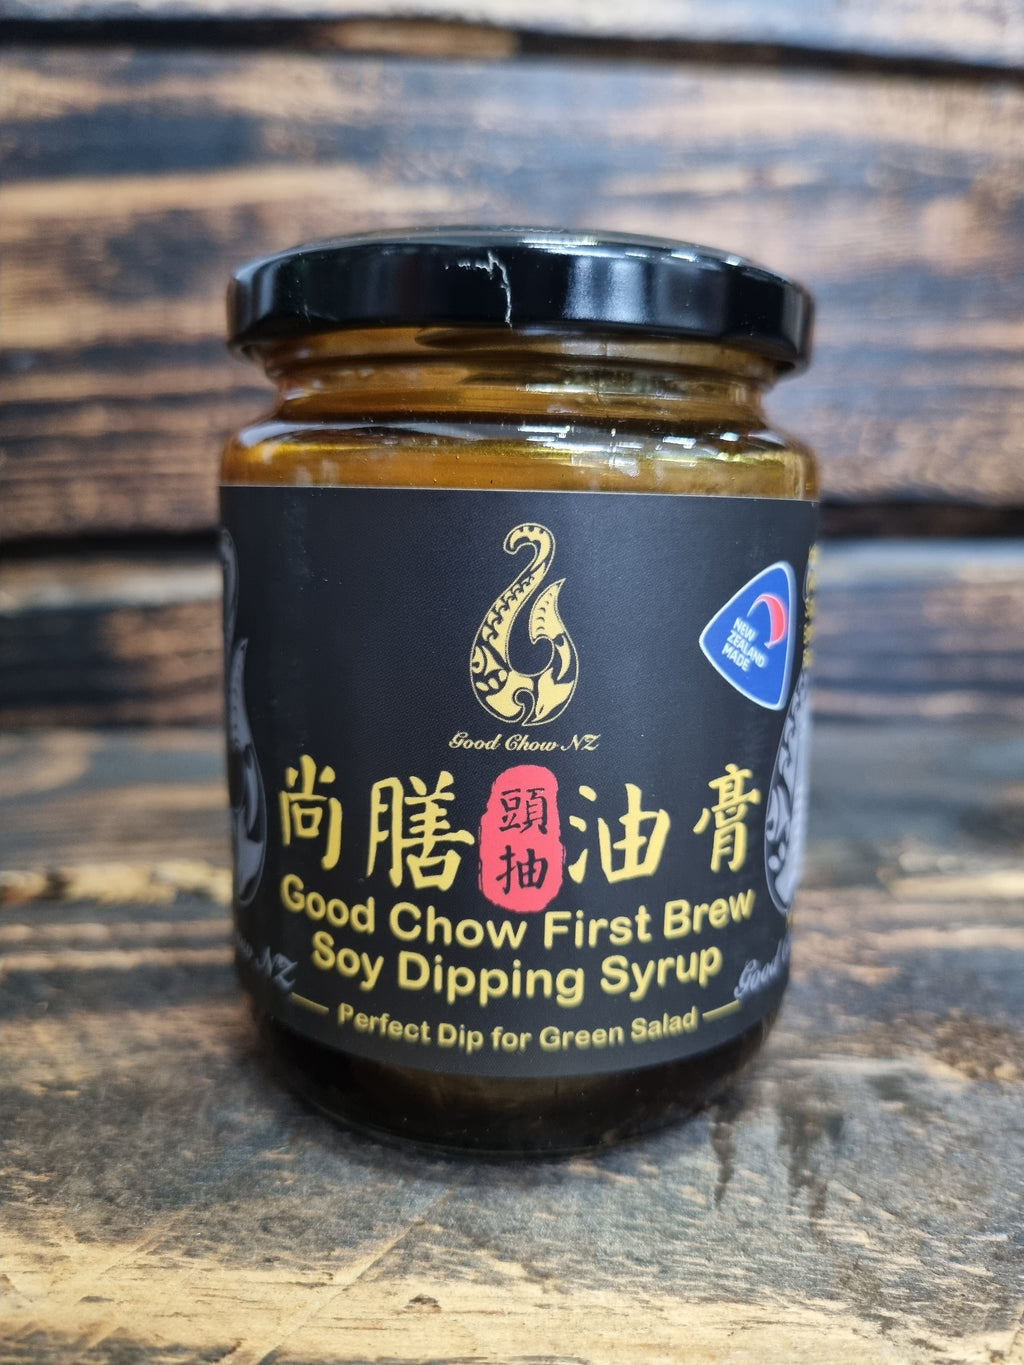 First Brew Soy Dipping Syrup by Good Chow